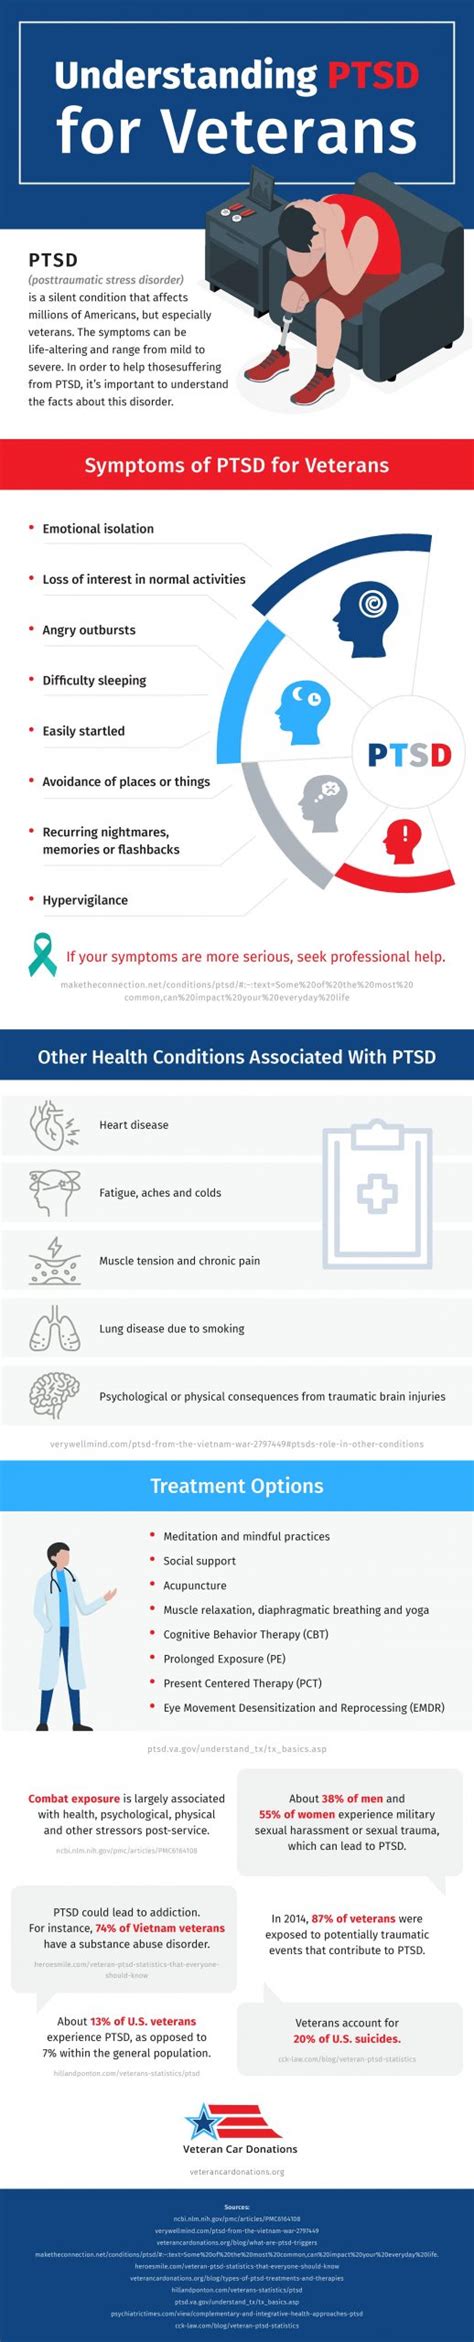 Essential Information To Help You Understand Ptsd For Veterans With